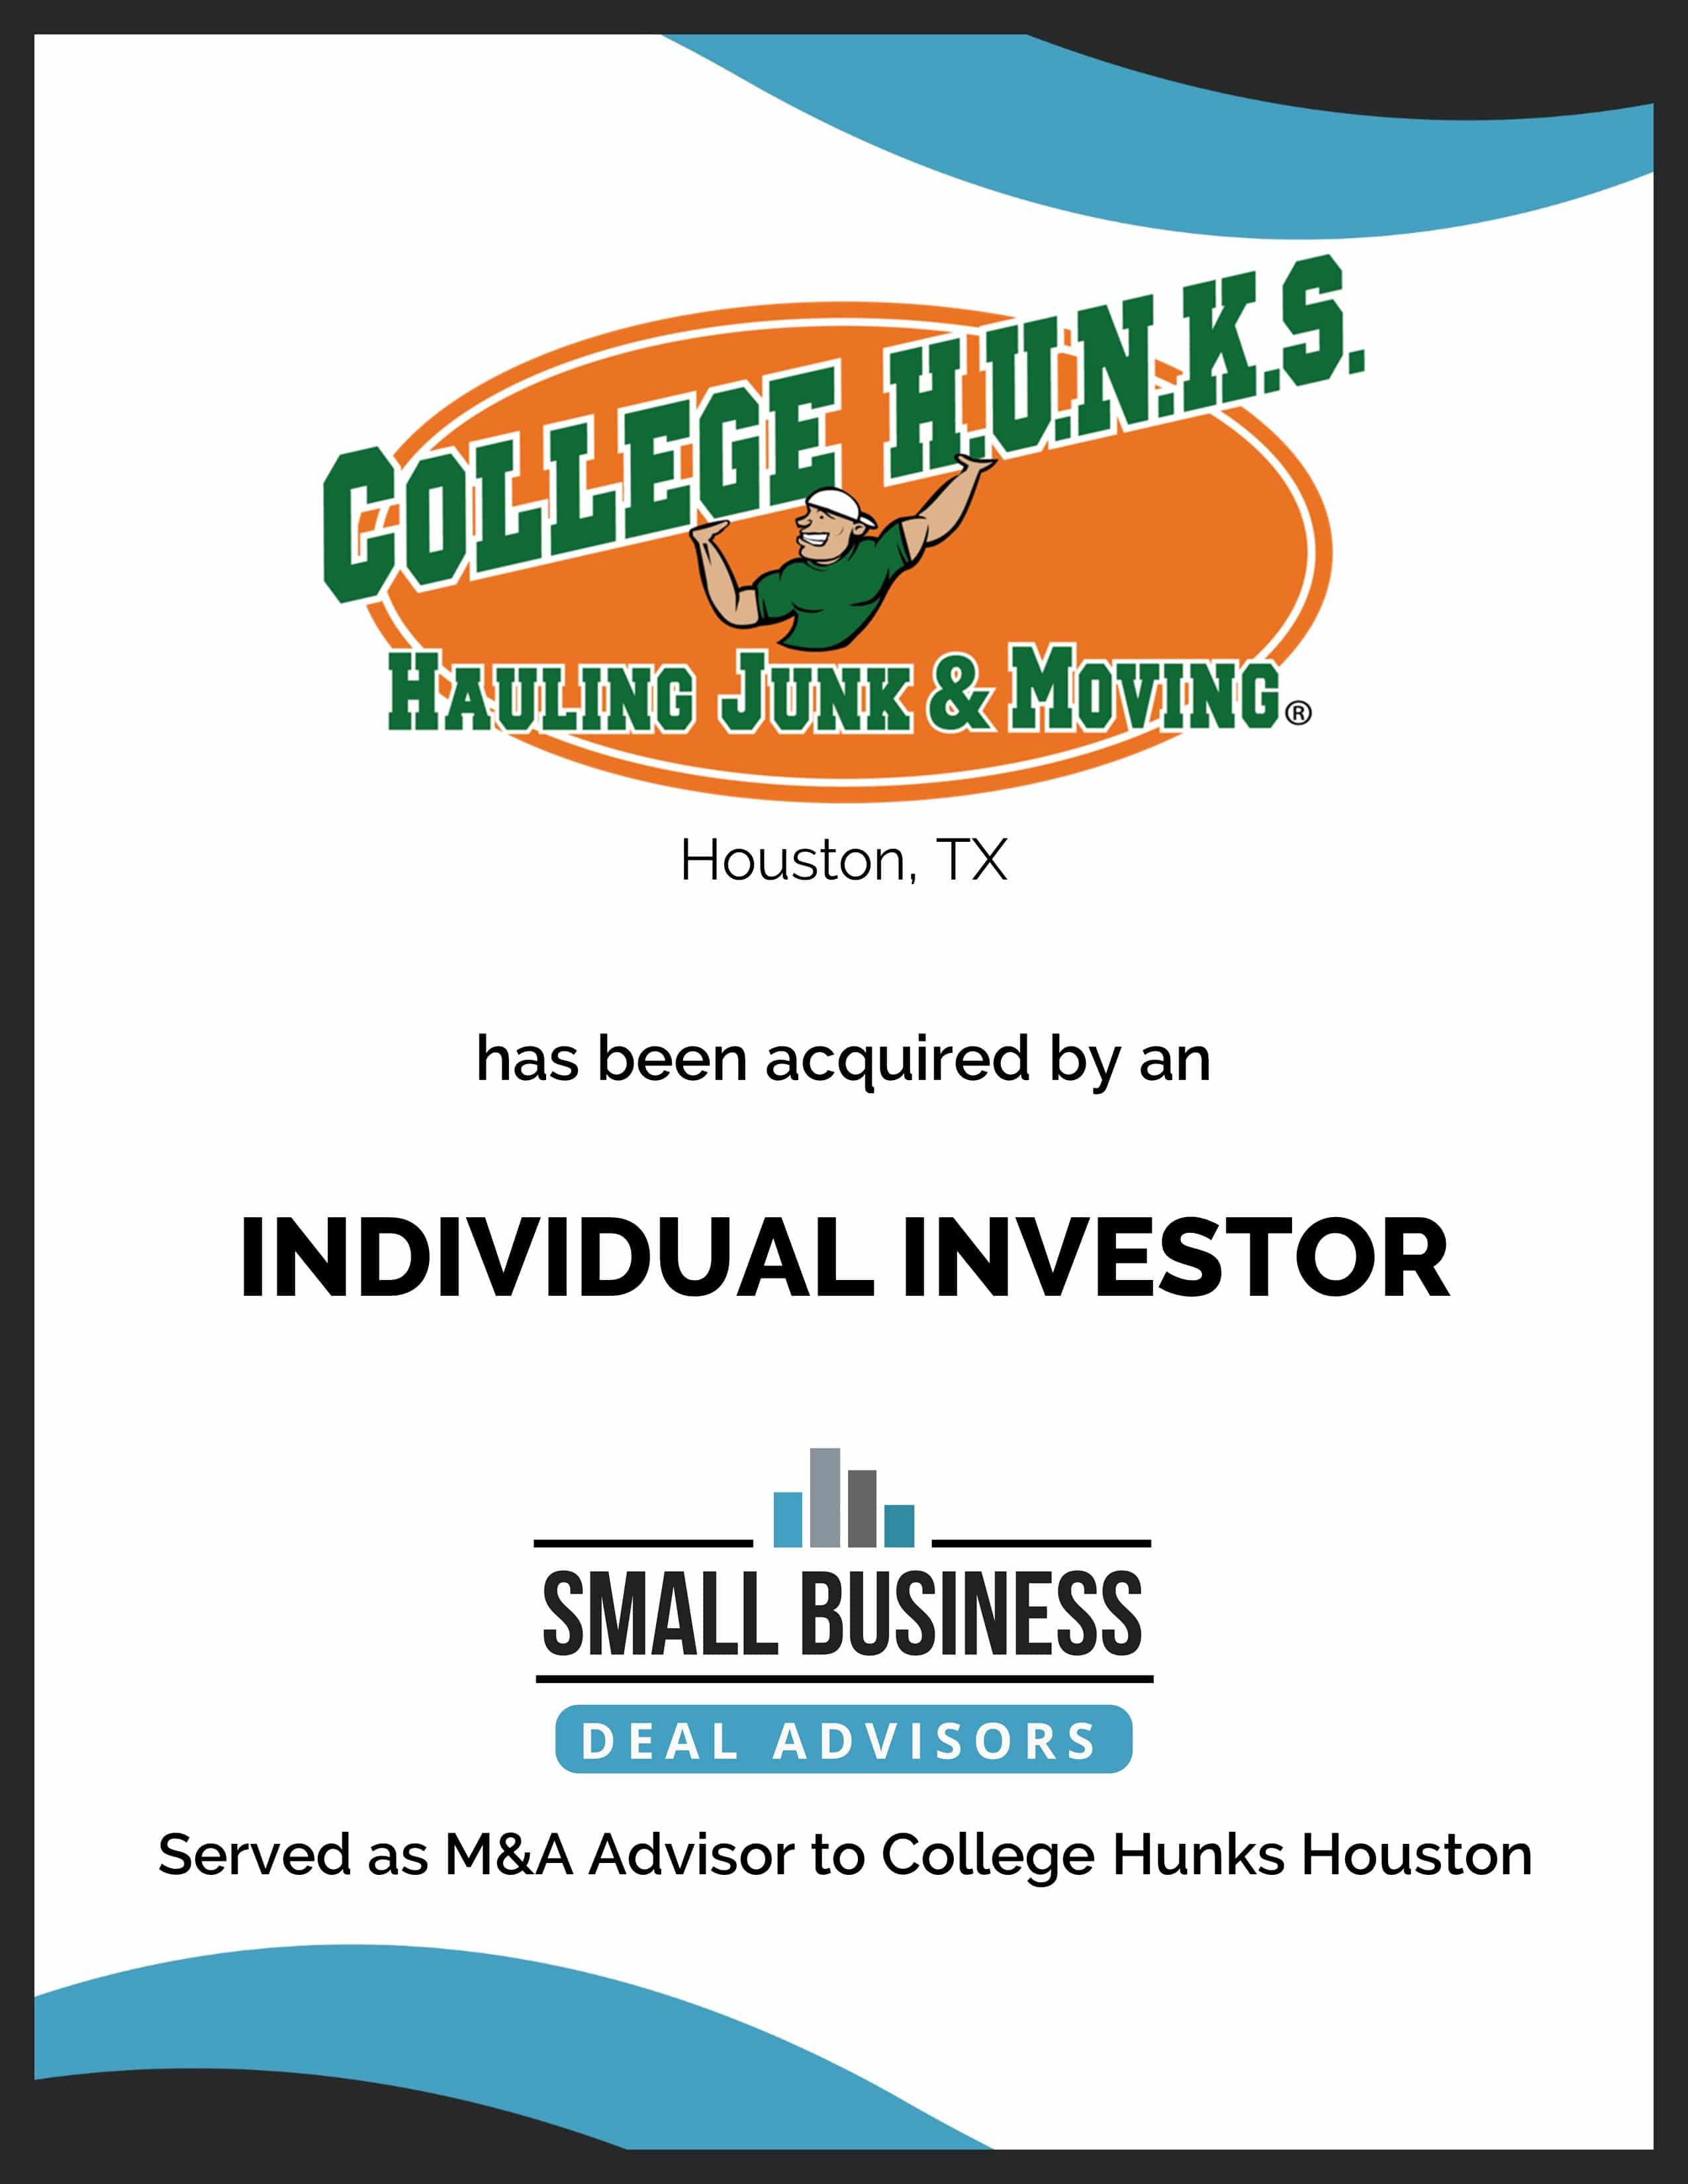 College Hunks Hauling Junk & Moving Houston Acquired by Investor